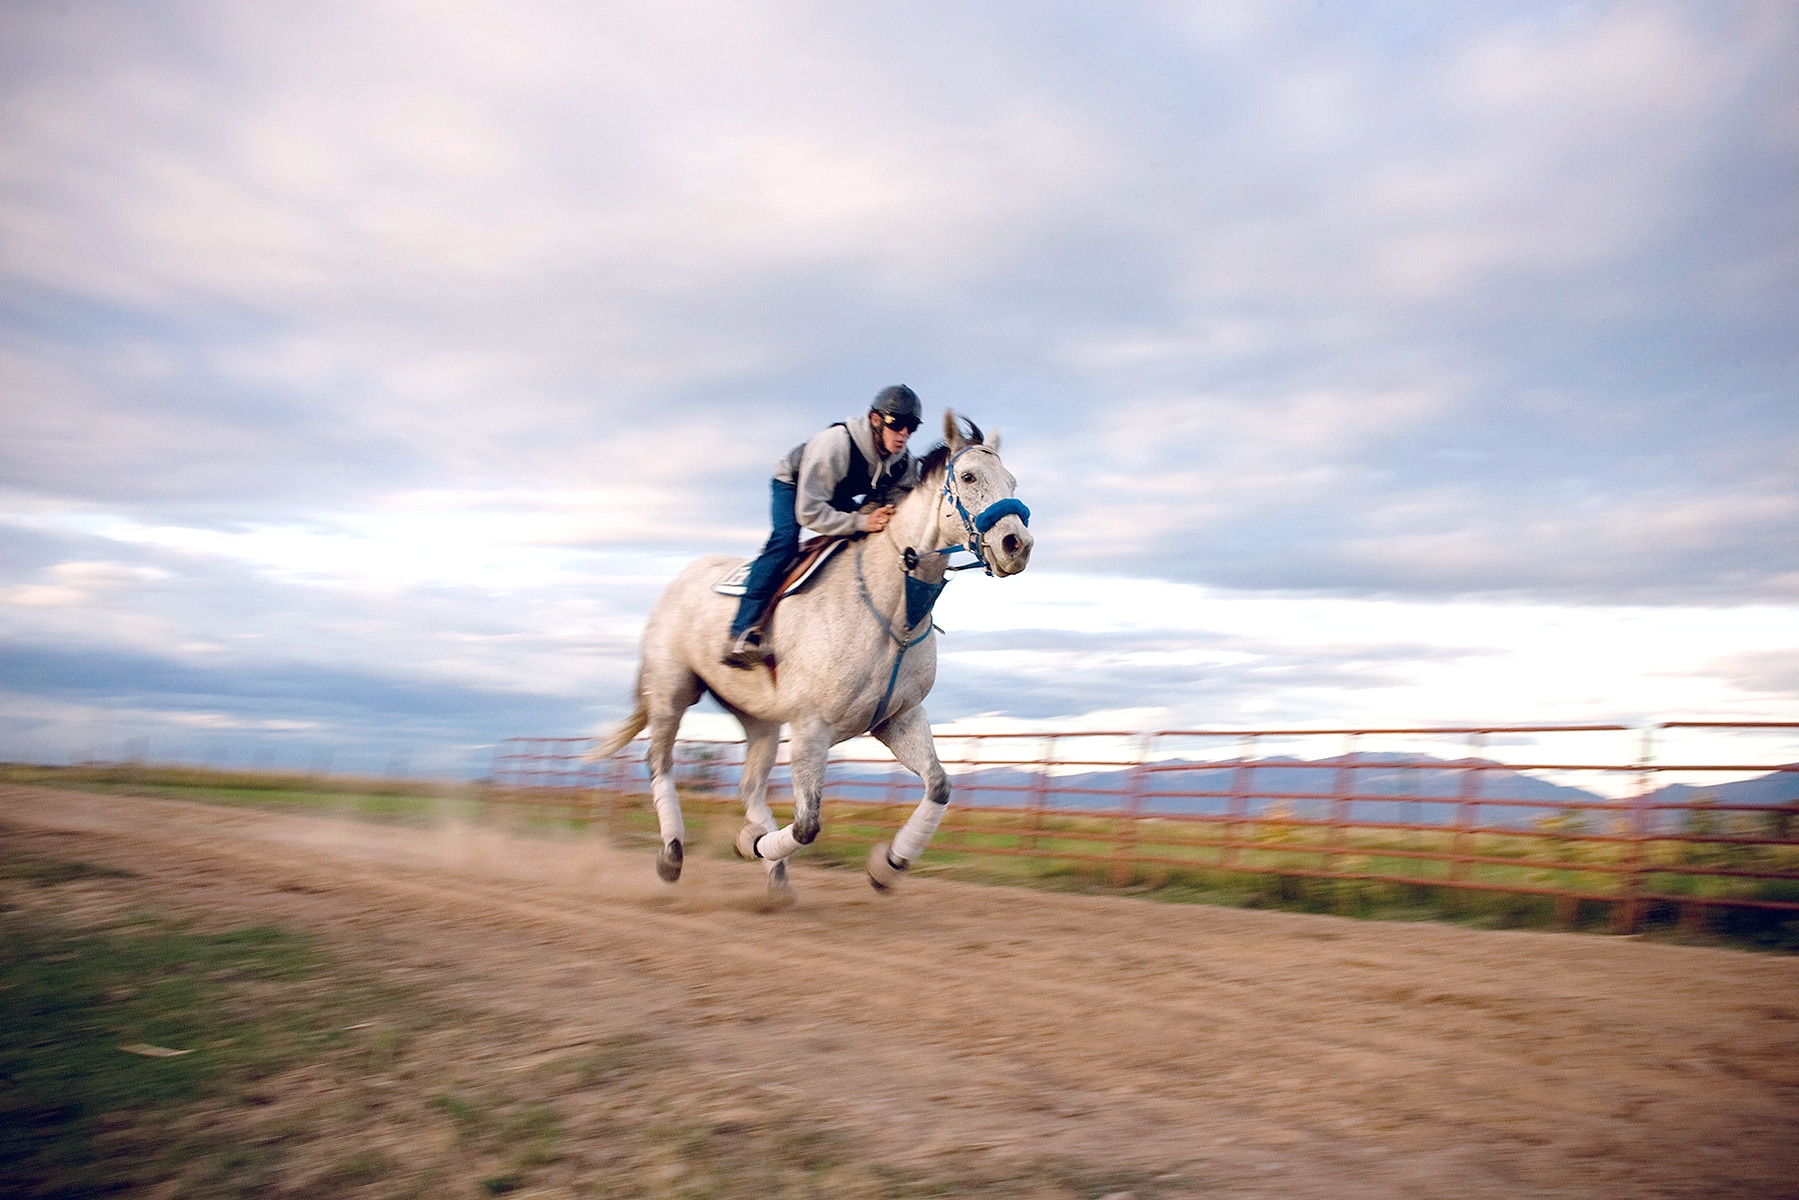 Photo of a man riding a white horse at a fast pace, developing grit.